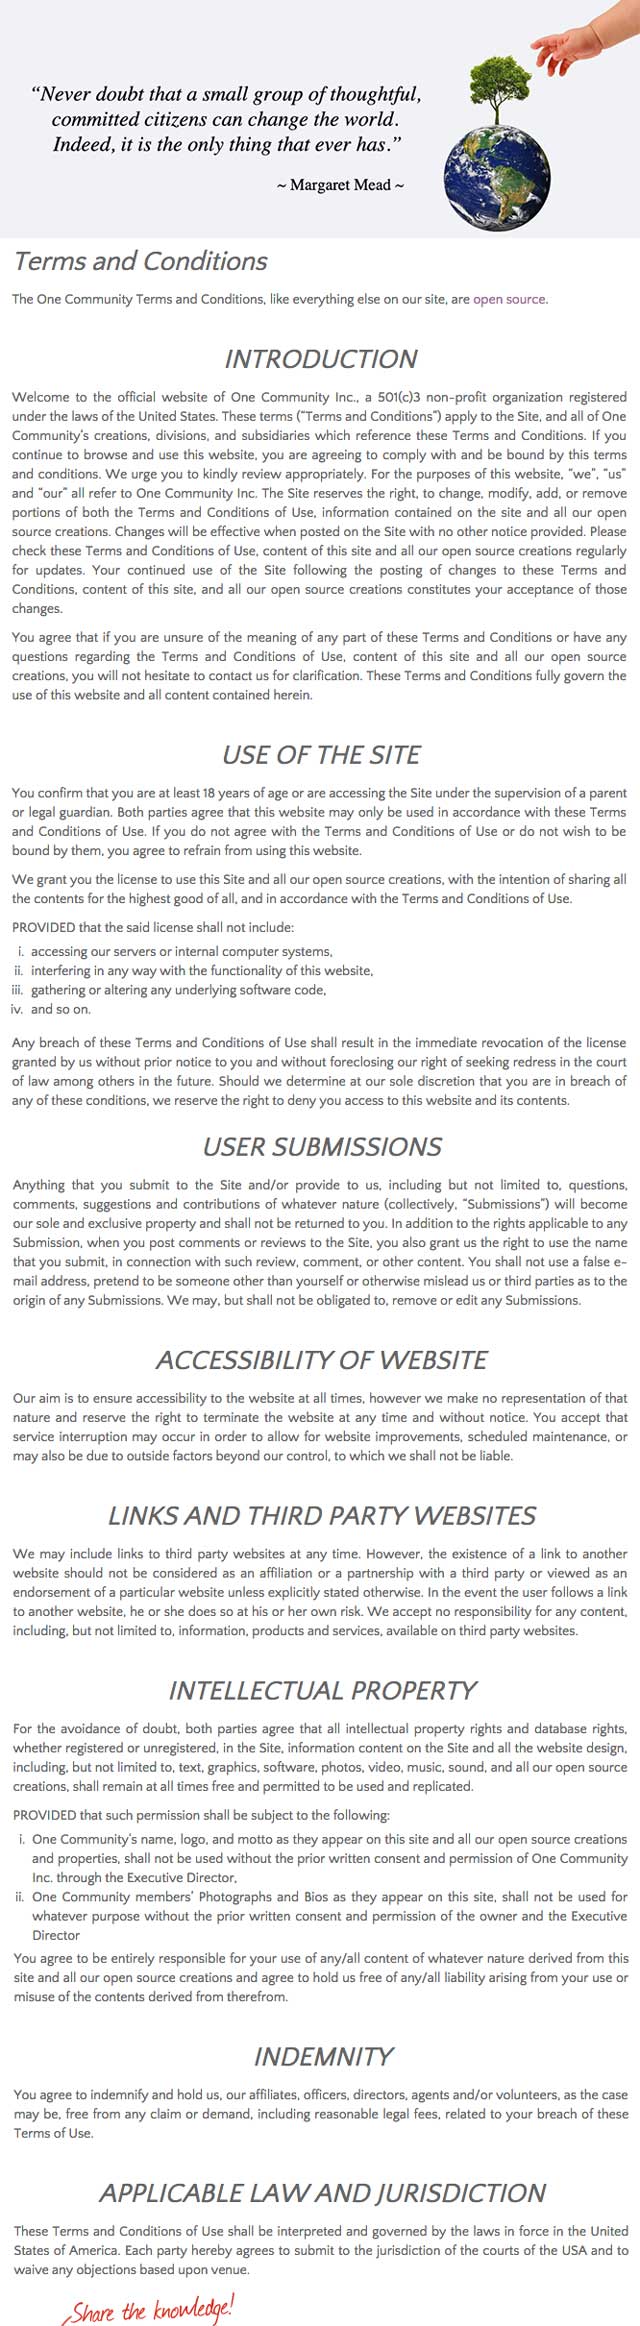 Terms and Conditions Page, One Community